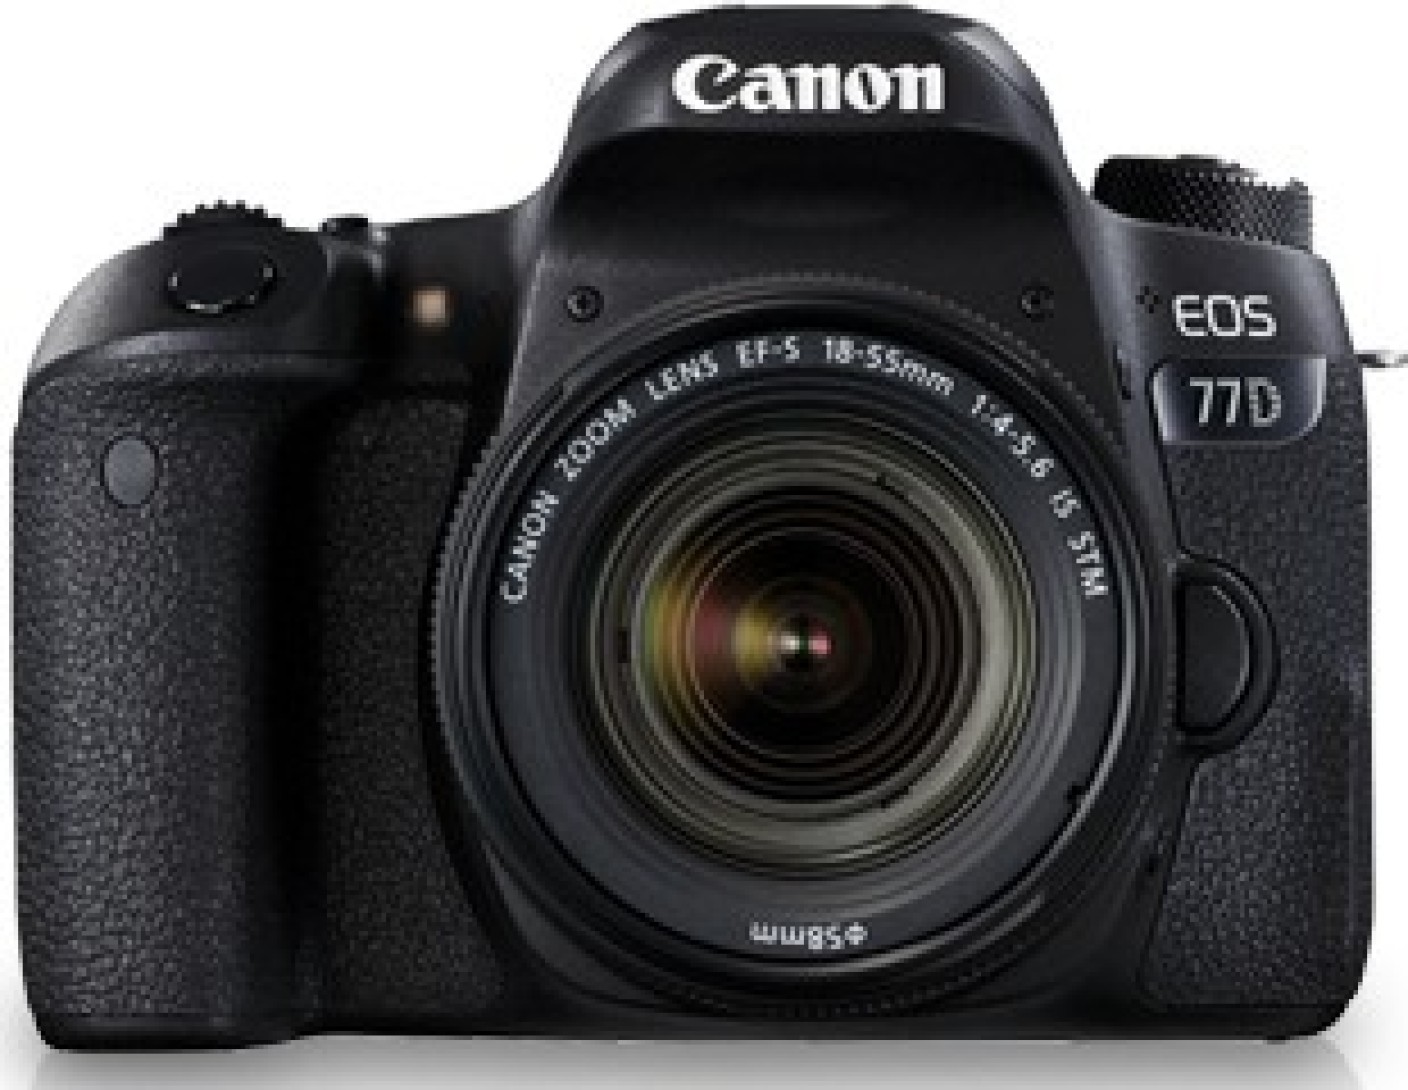 Canon EOS 77D DSLR Camera Body with Single Lens: EF-S18-55 IS STM (16